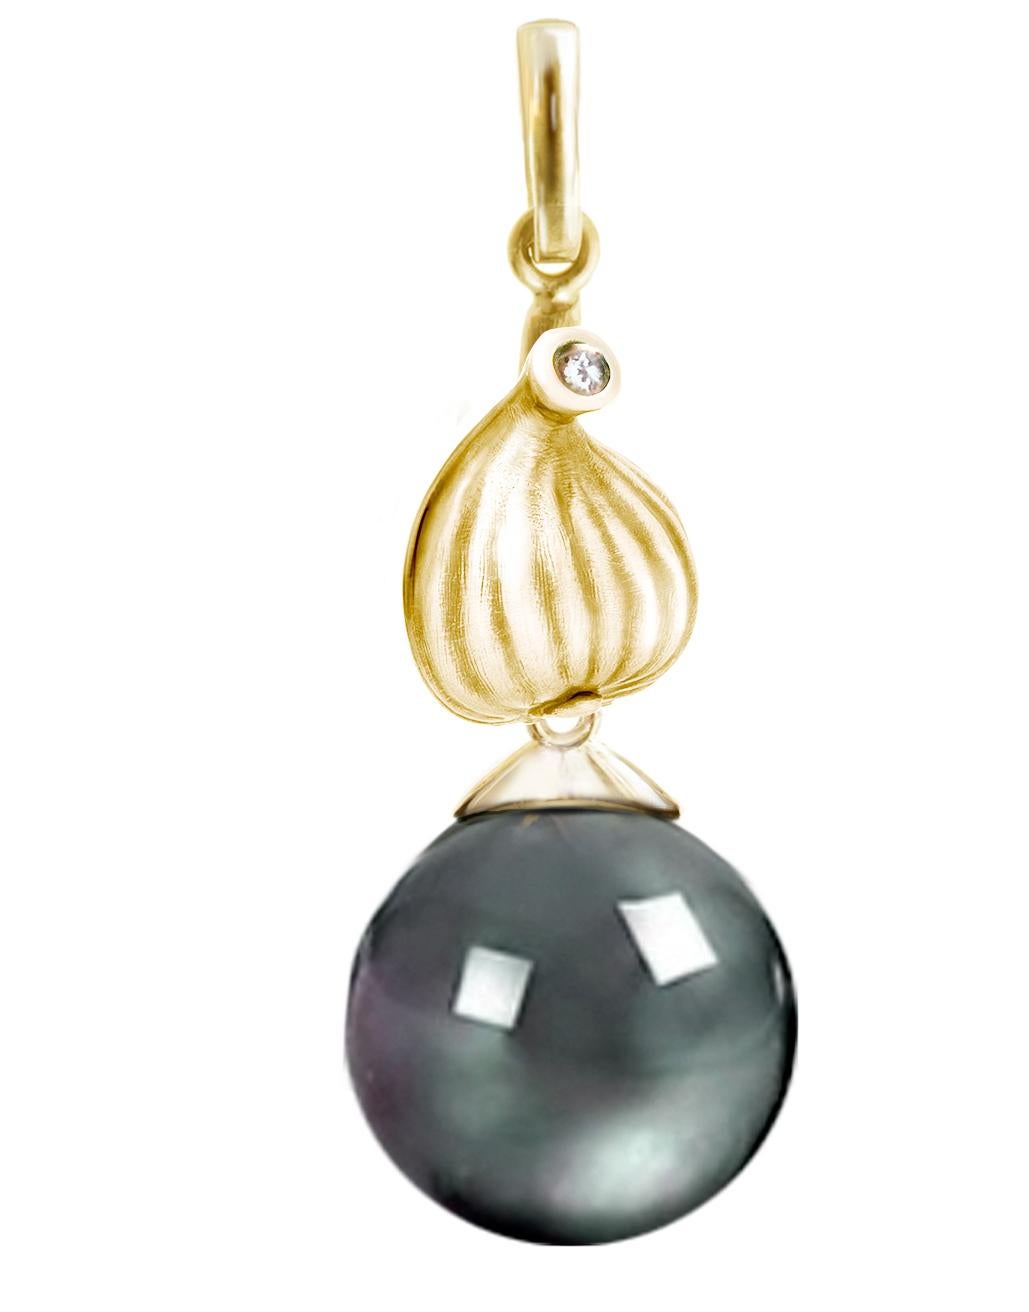 These Fig drop earrings are made of 18 karat yellow gold with detachable 11 mm Tahitian black pearls and two diamonds. These earrings were designed by the artist and were featured in a review by Vogue UA. We use top-quality natural diamonds with a